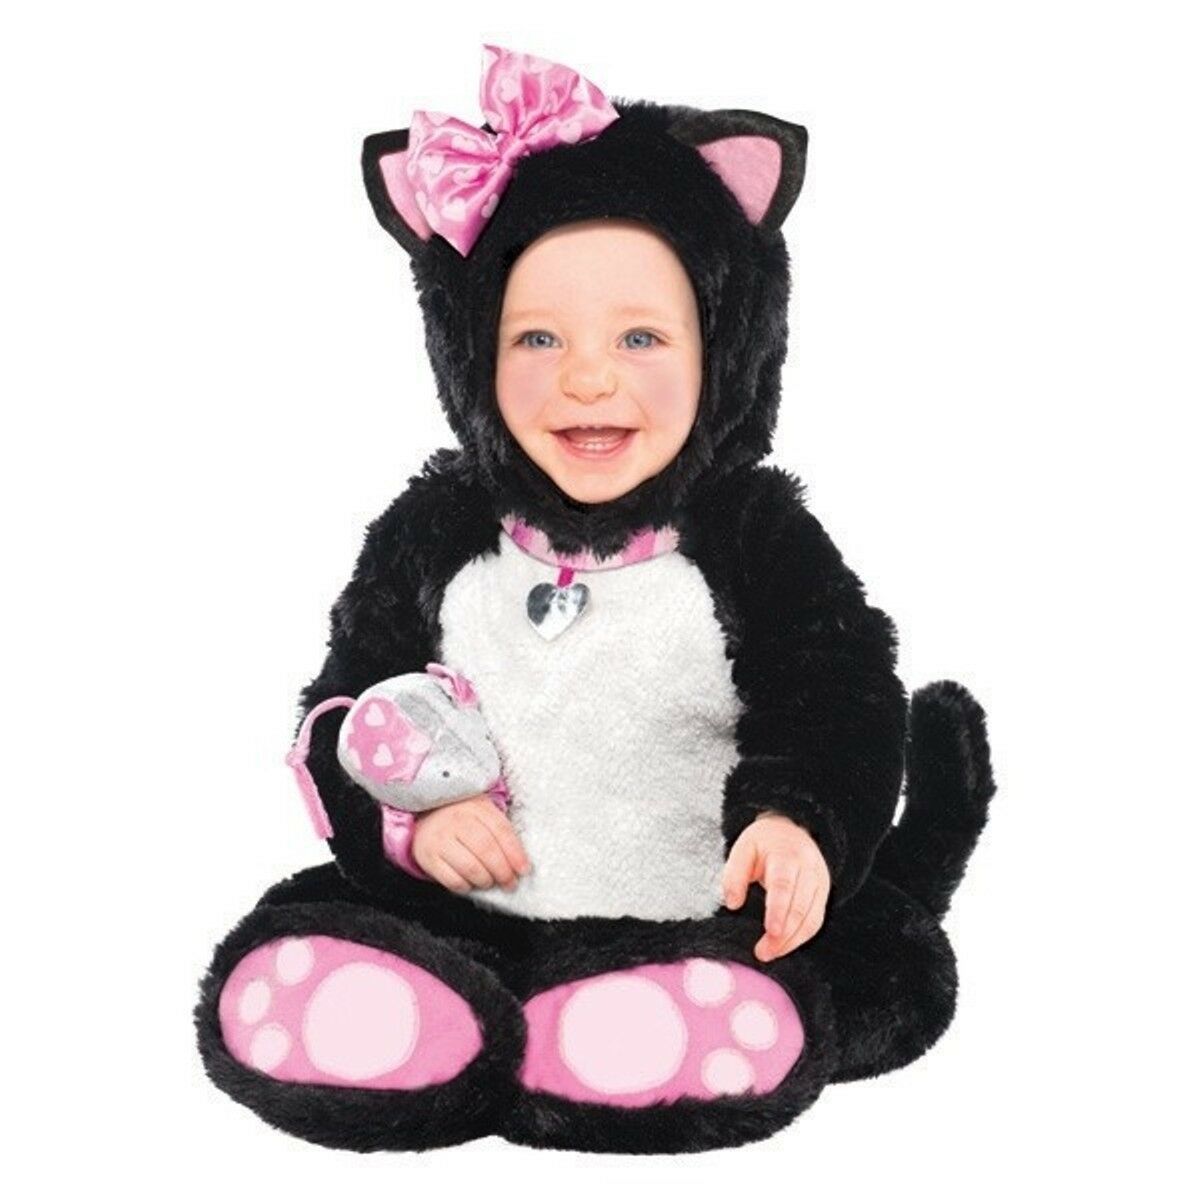 Itty Bitty Kitty Infant 0-6 Months Costume with Mouse Rattle - $36.67